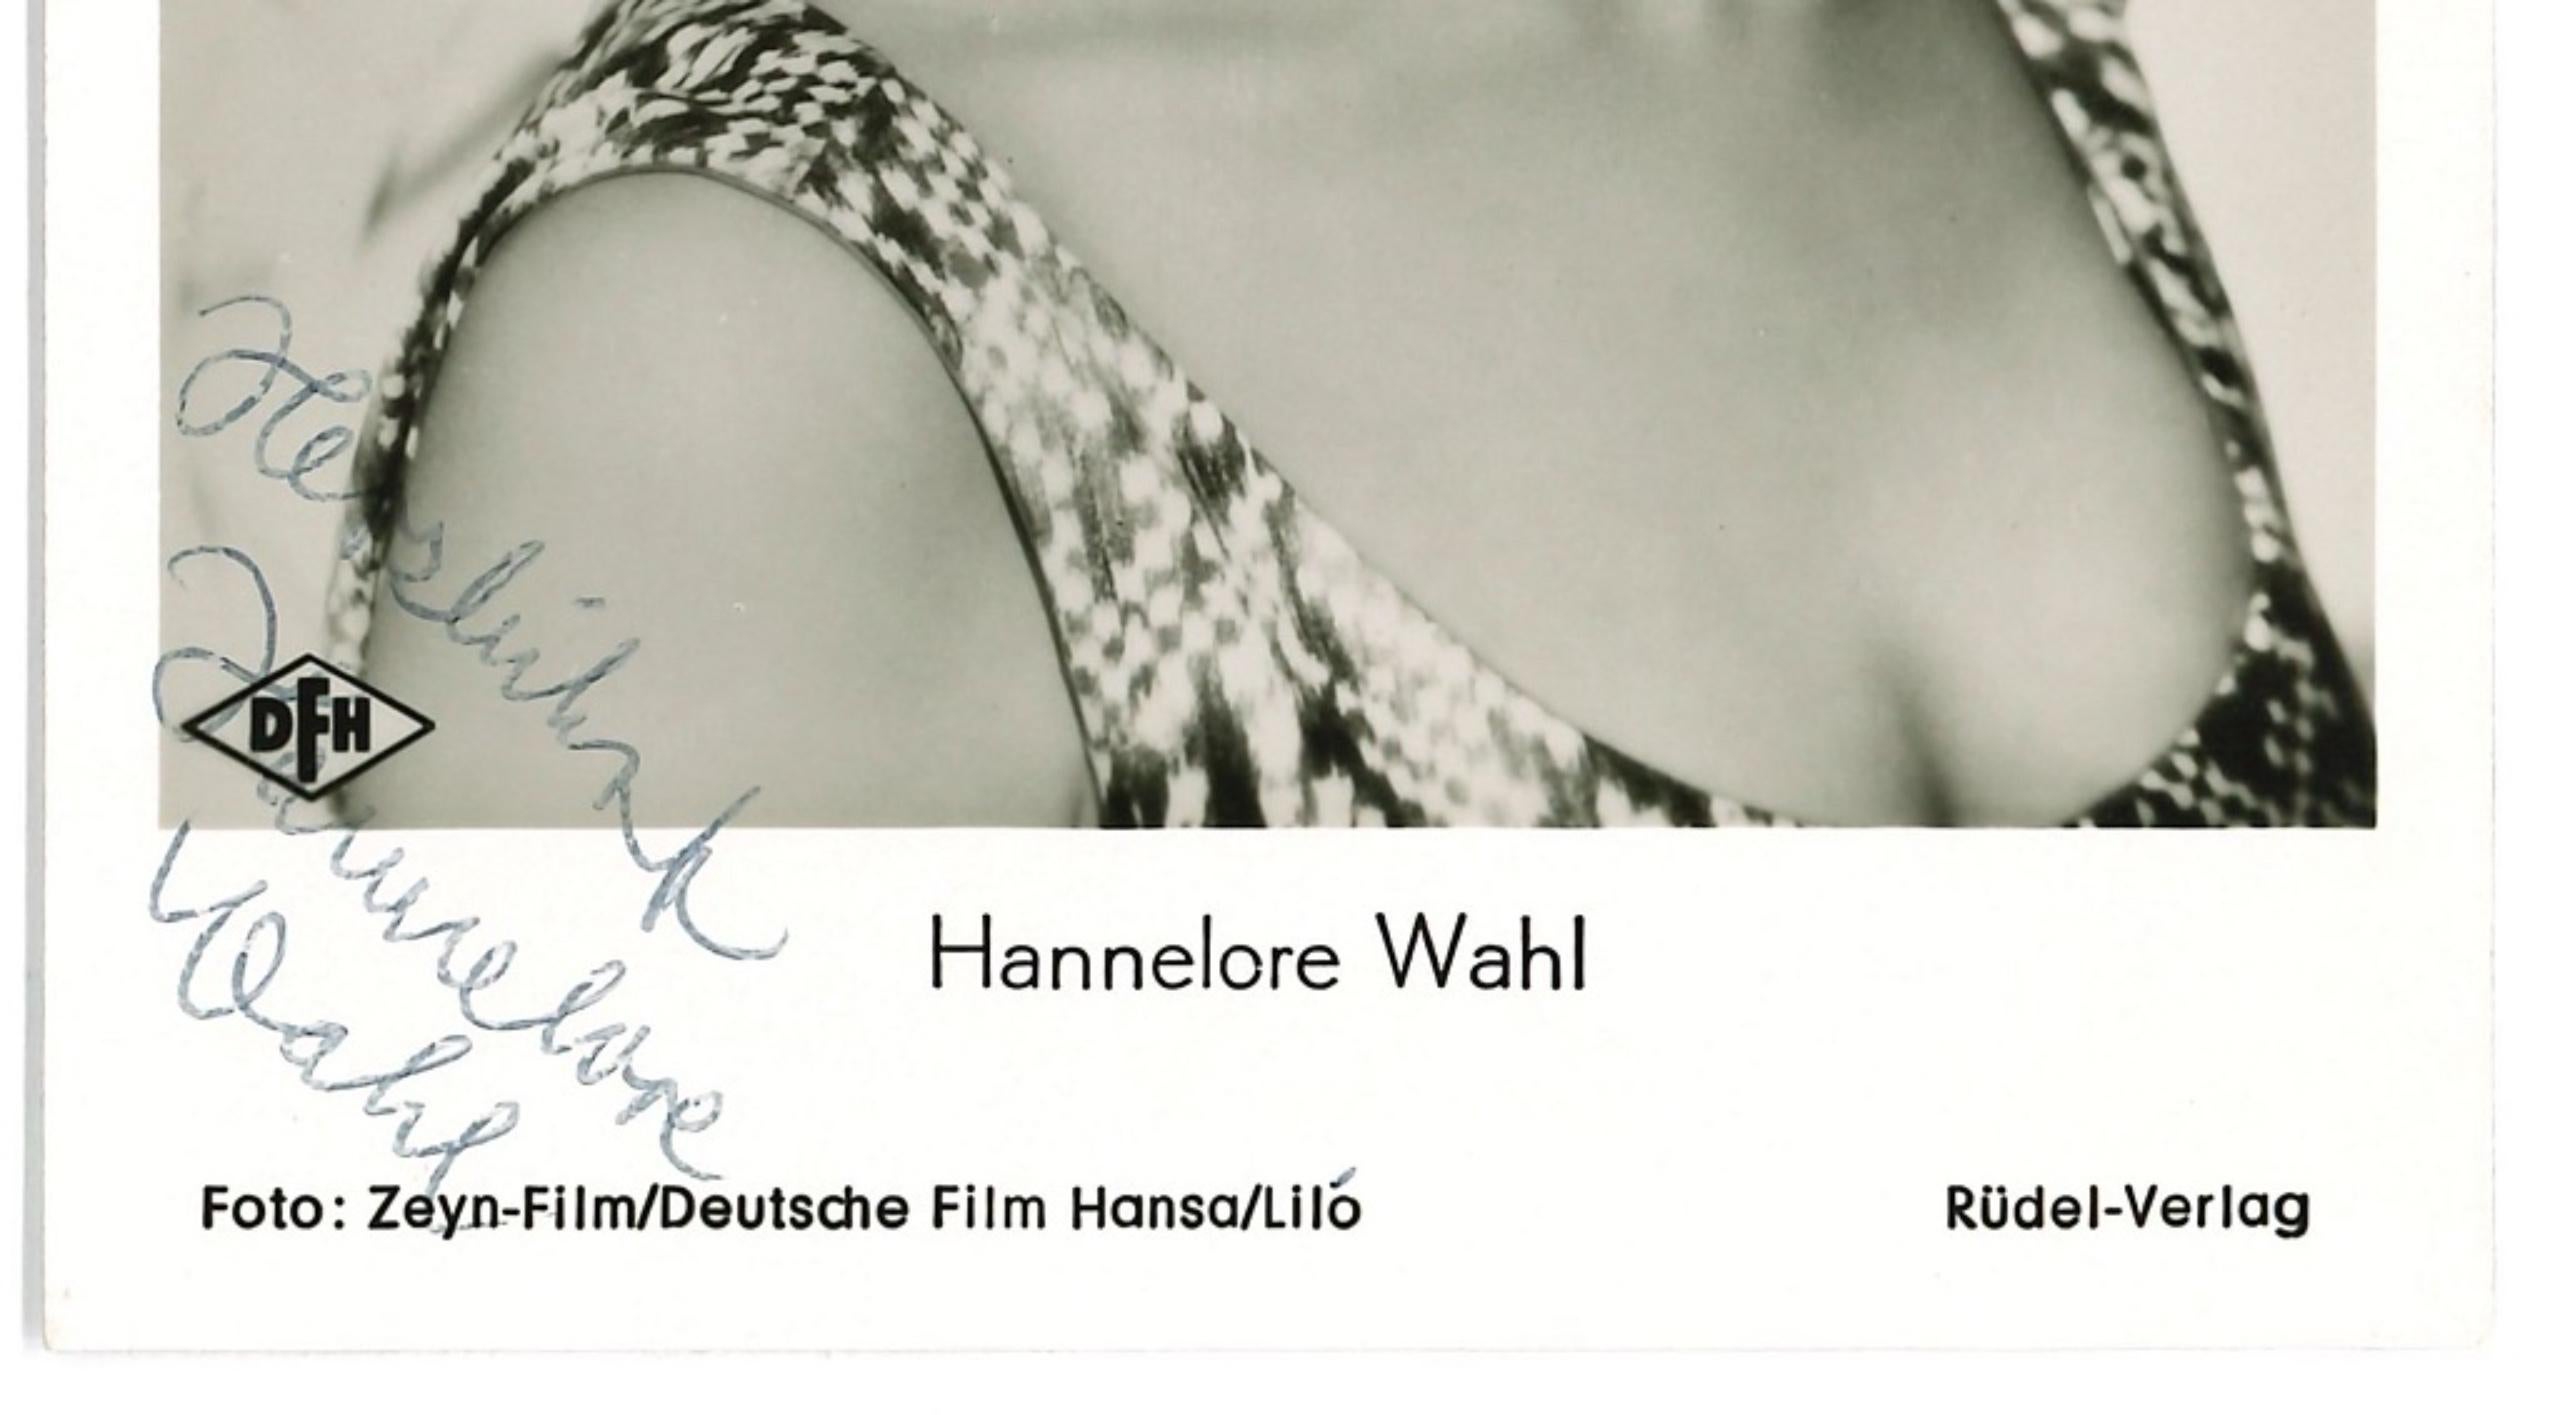 Autographed Portrait of Hannelore Wahl - 1960s - Photograph by Unknown